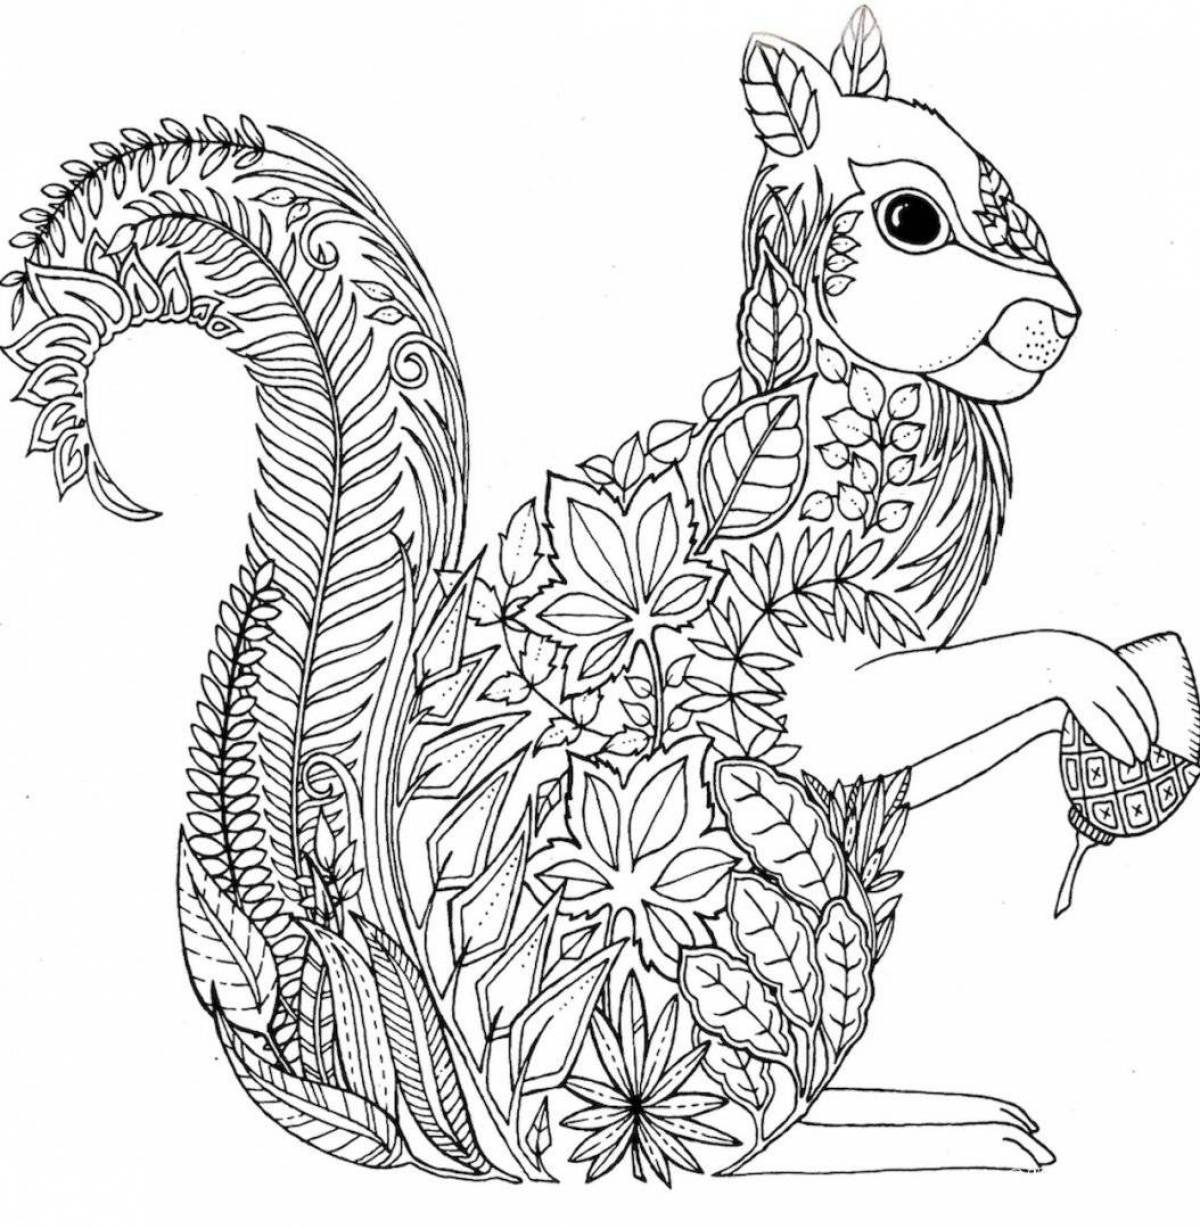 Greatly intricate coloring book